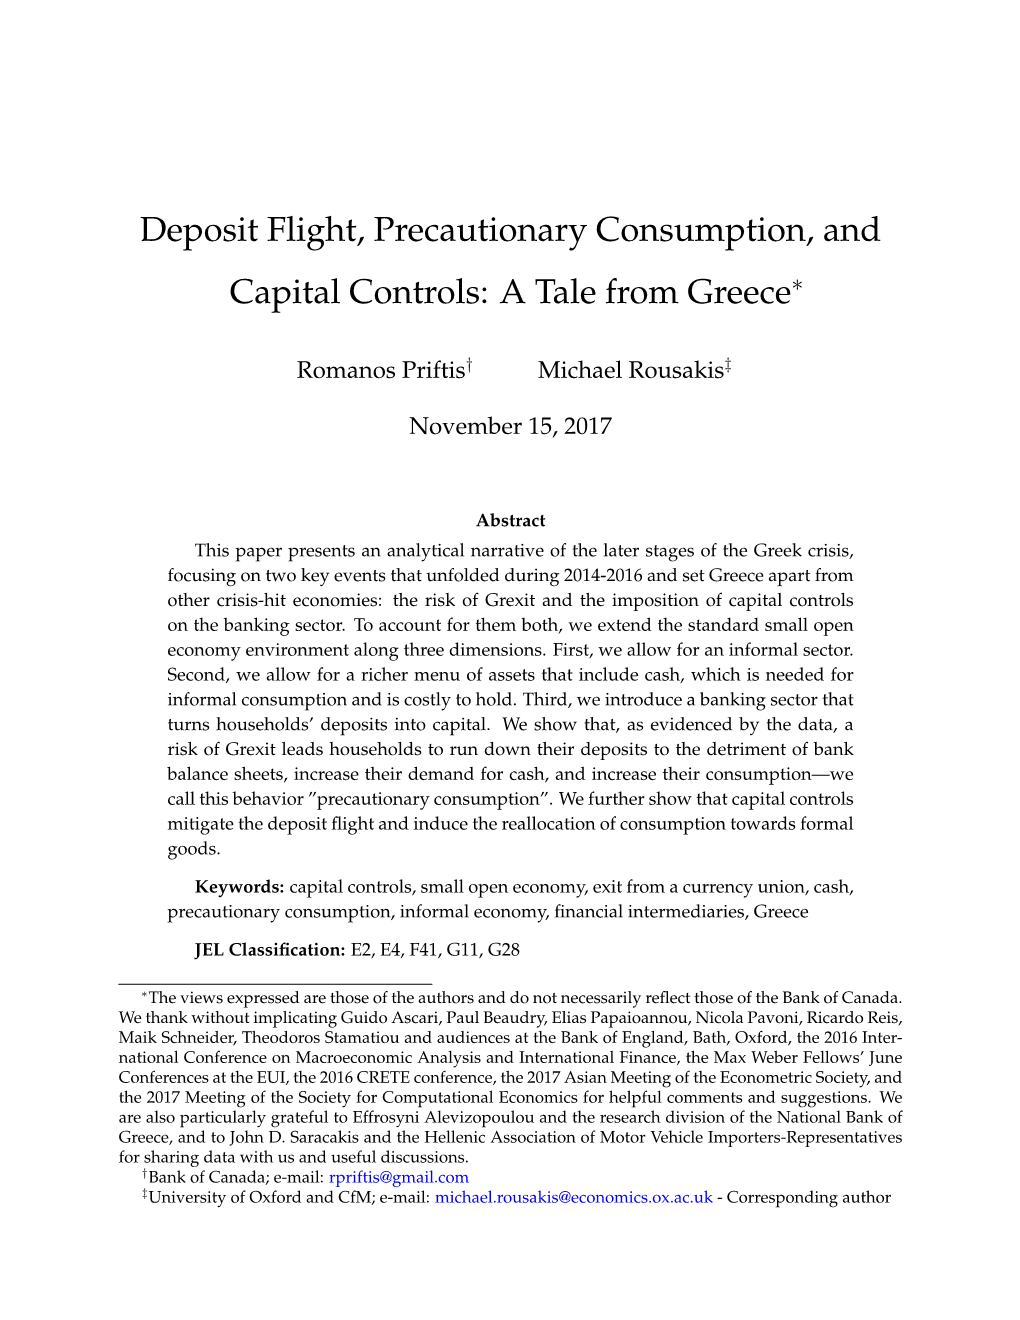 Deposit Flight, Precautionary Consumption, and Capital Controls: a Tale from Greece∗